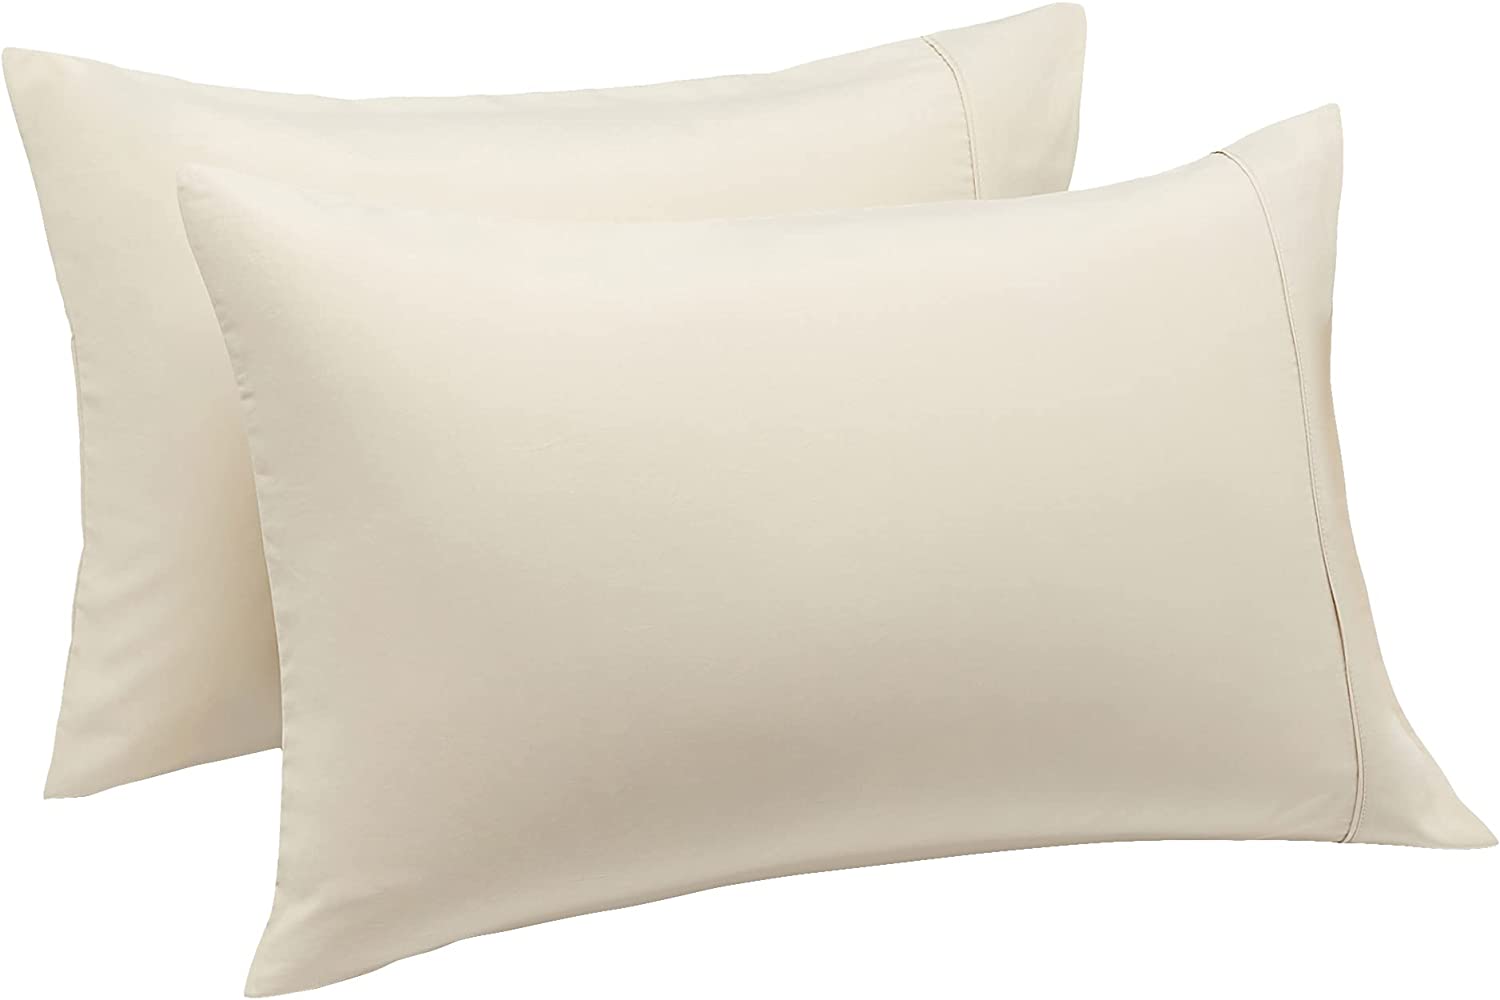 Bamboo Pillow Case Soft Comfortable Breathable (2 Pack)